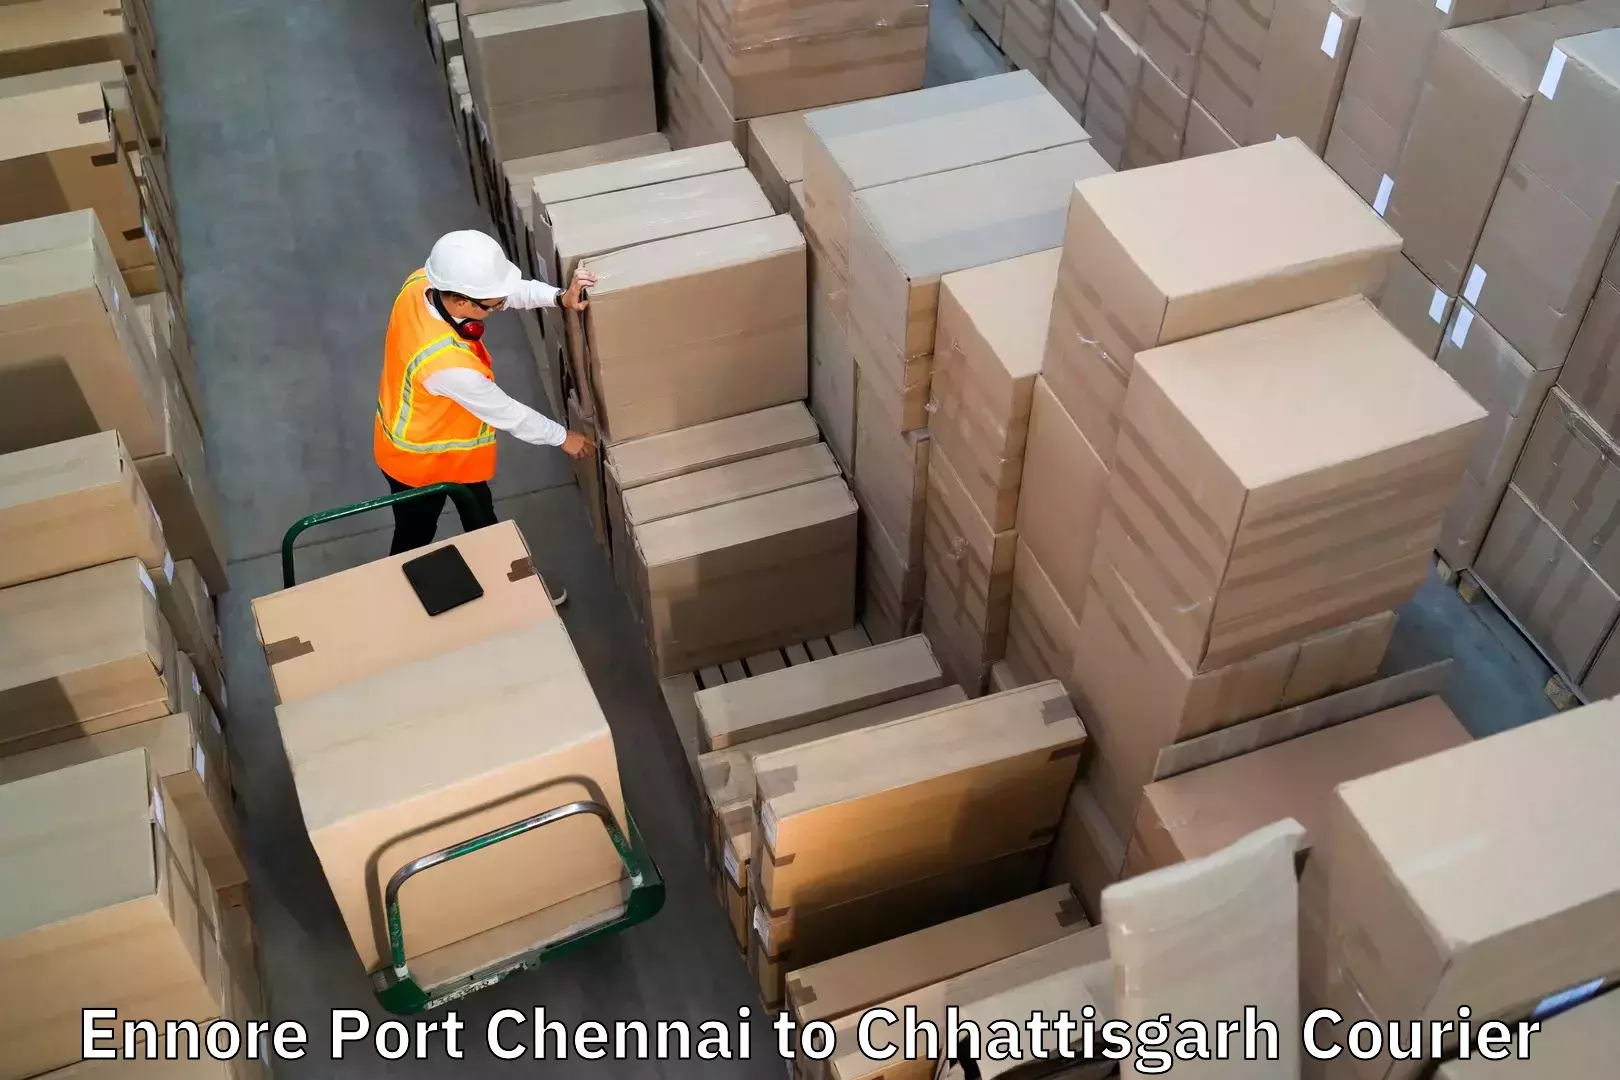 Door to door luggage delivery Ennore Port Chennai to Bhilai